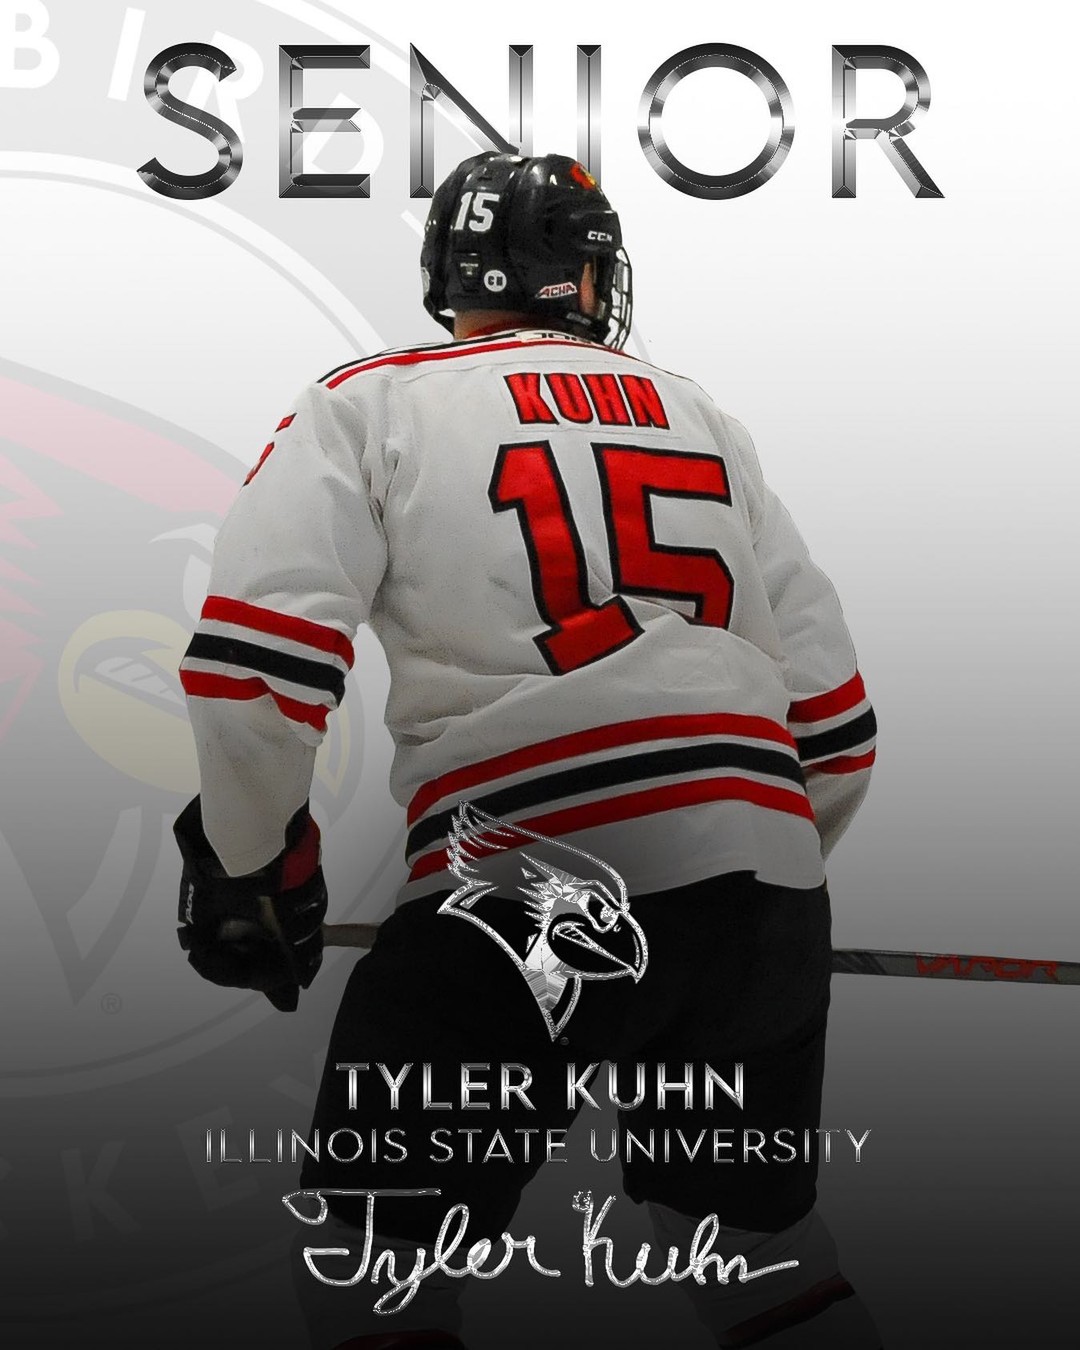 happy senior night to our D1 star @tkuhn15 
you can catch this game against Illinois tonight at 7 @ Grossinger Motors Arena— food and beverage vendors will be available! 
-
#rollbirds #acha #collegehockey